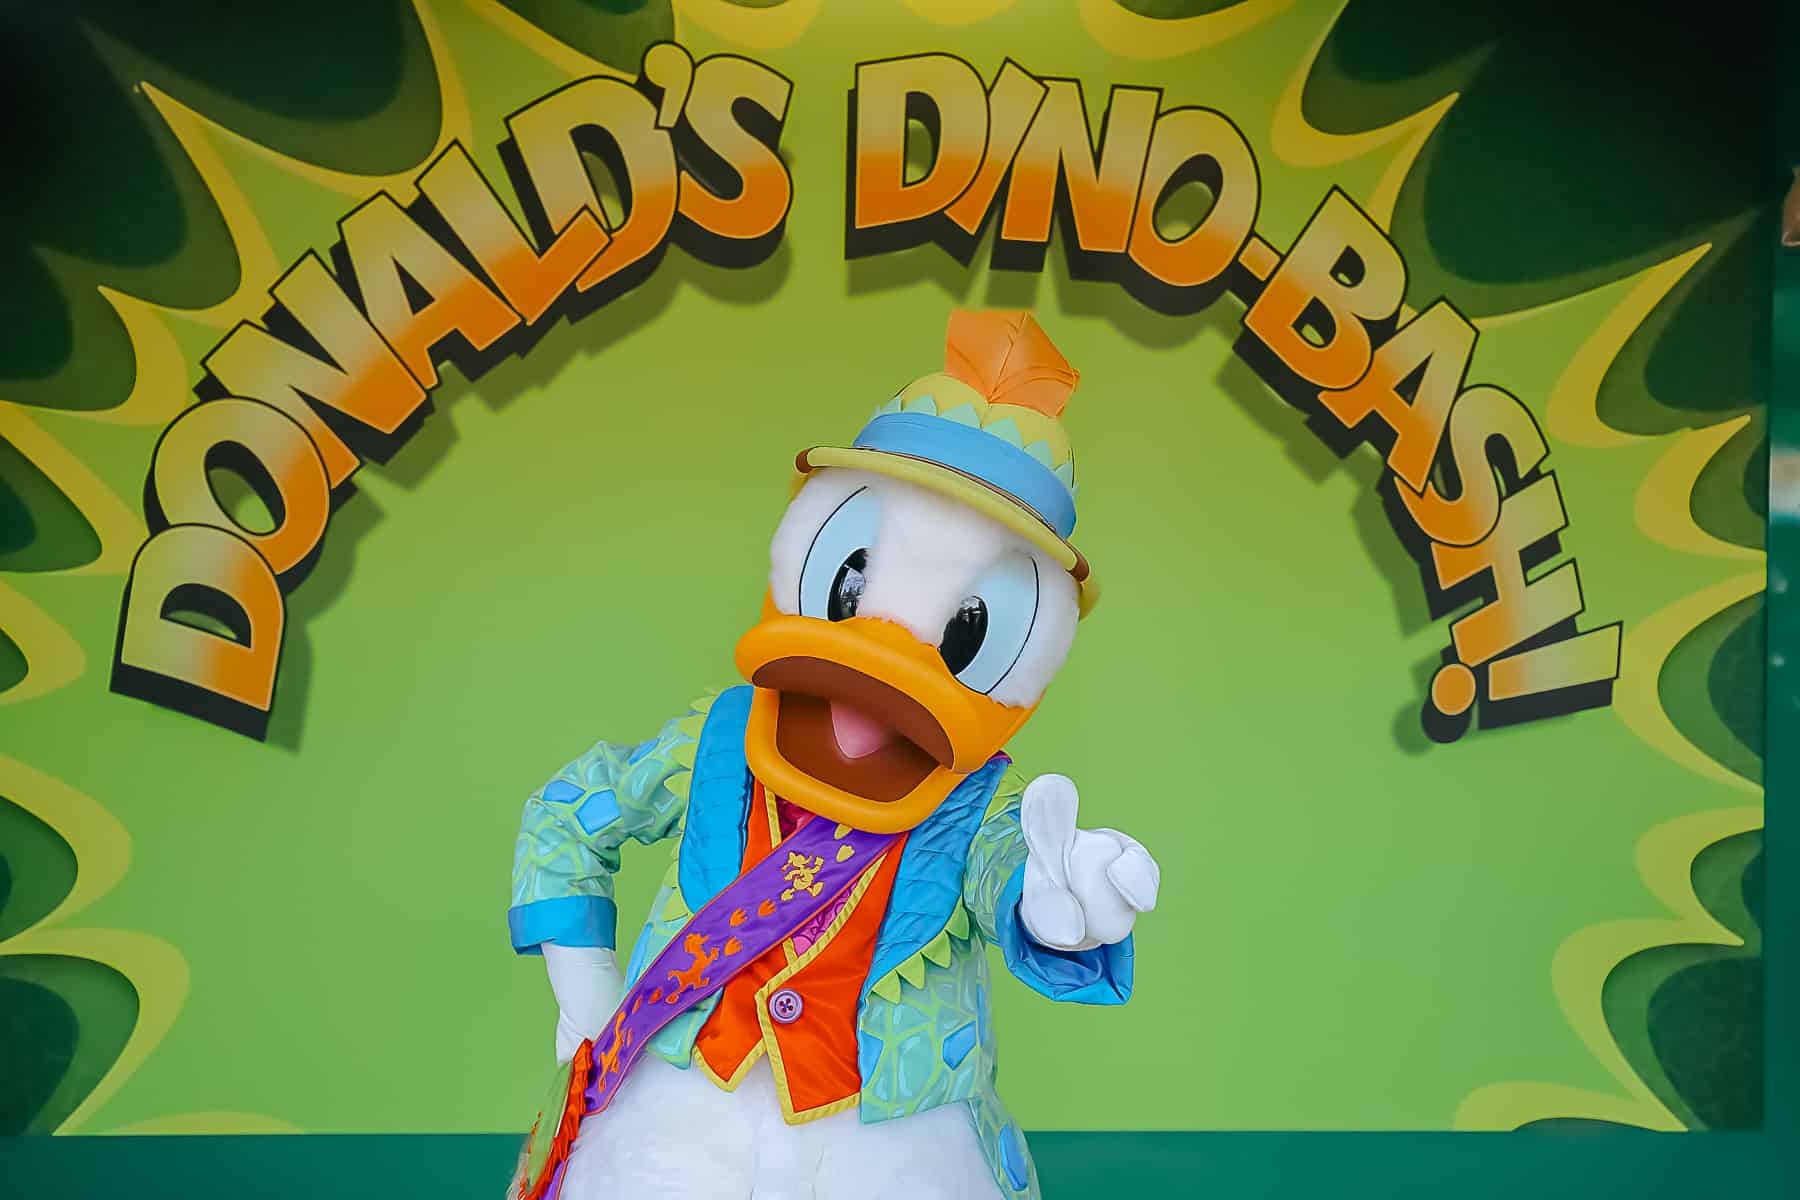 Donald Duck in his prehistoric costume poses with the number 1 